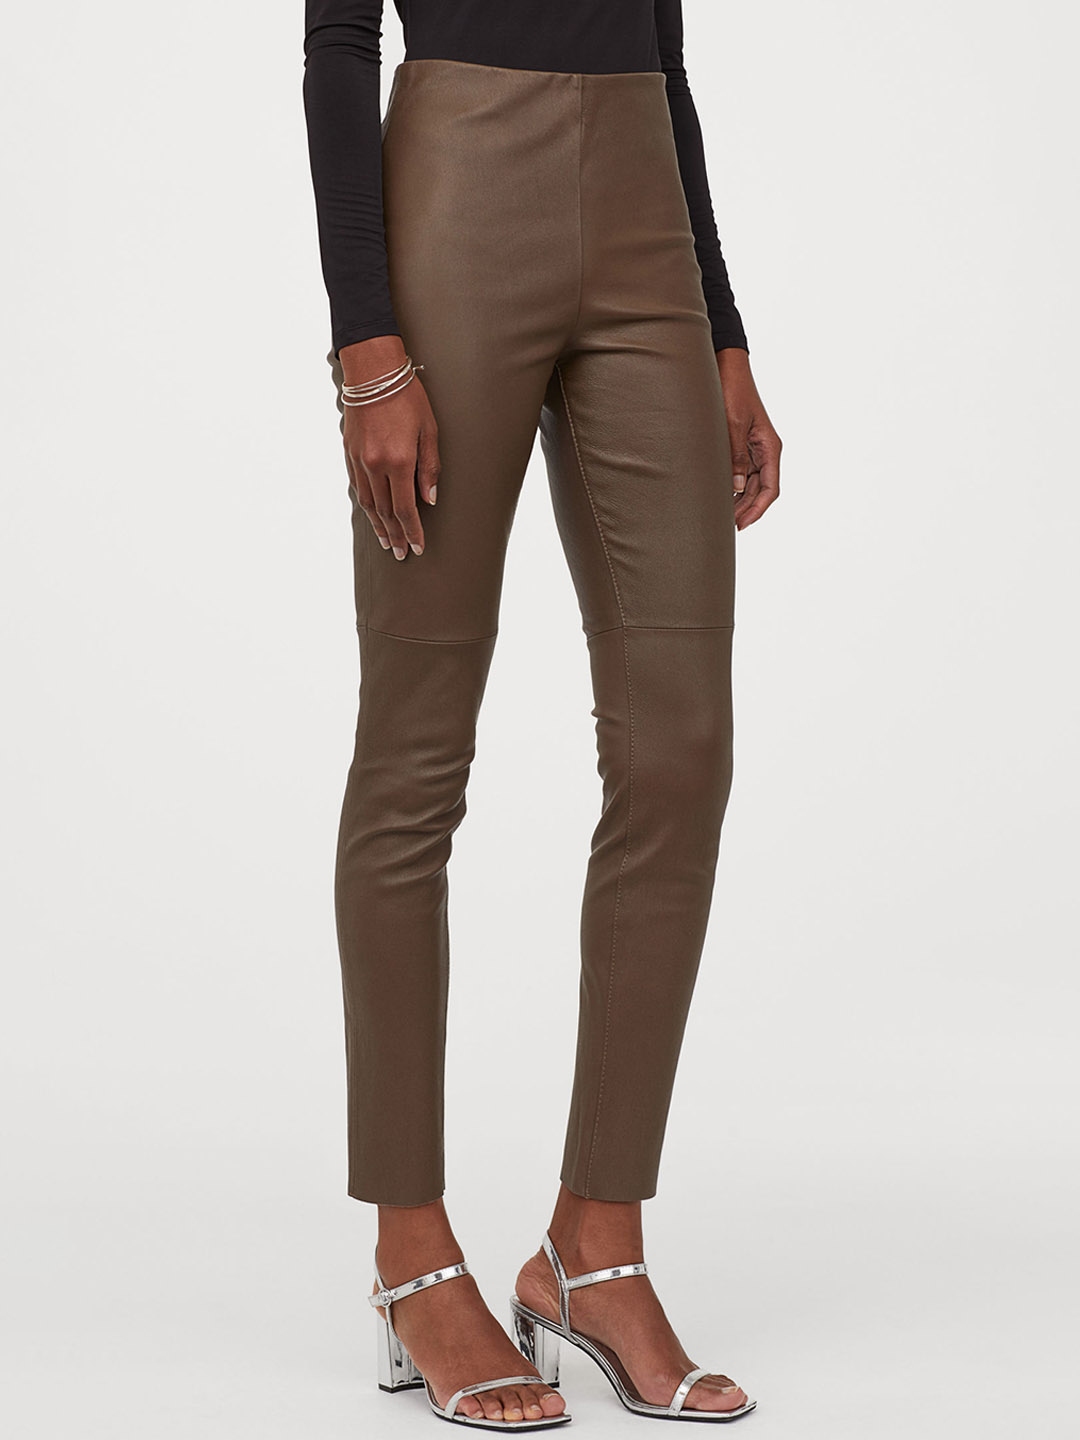 Brown Leather Leggings H&m  International Society of Precision